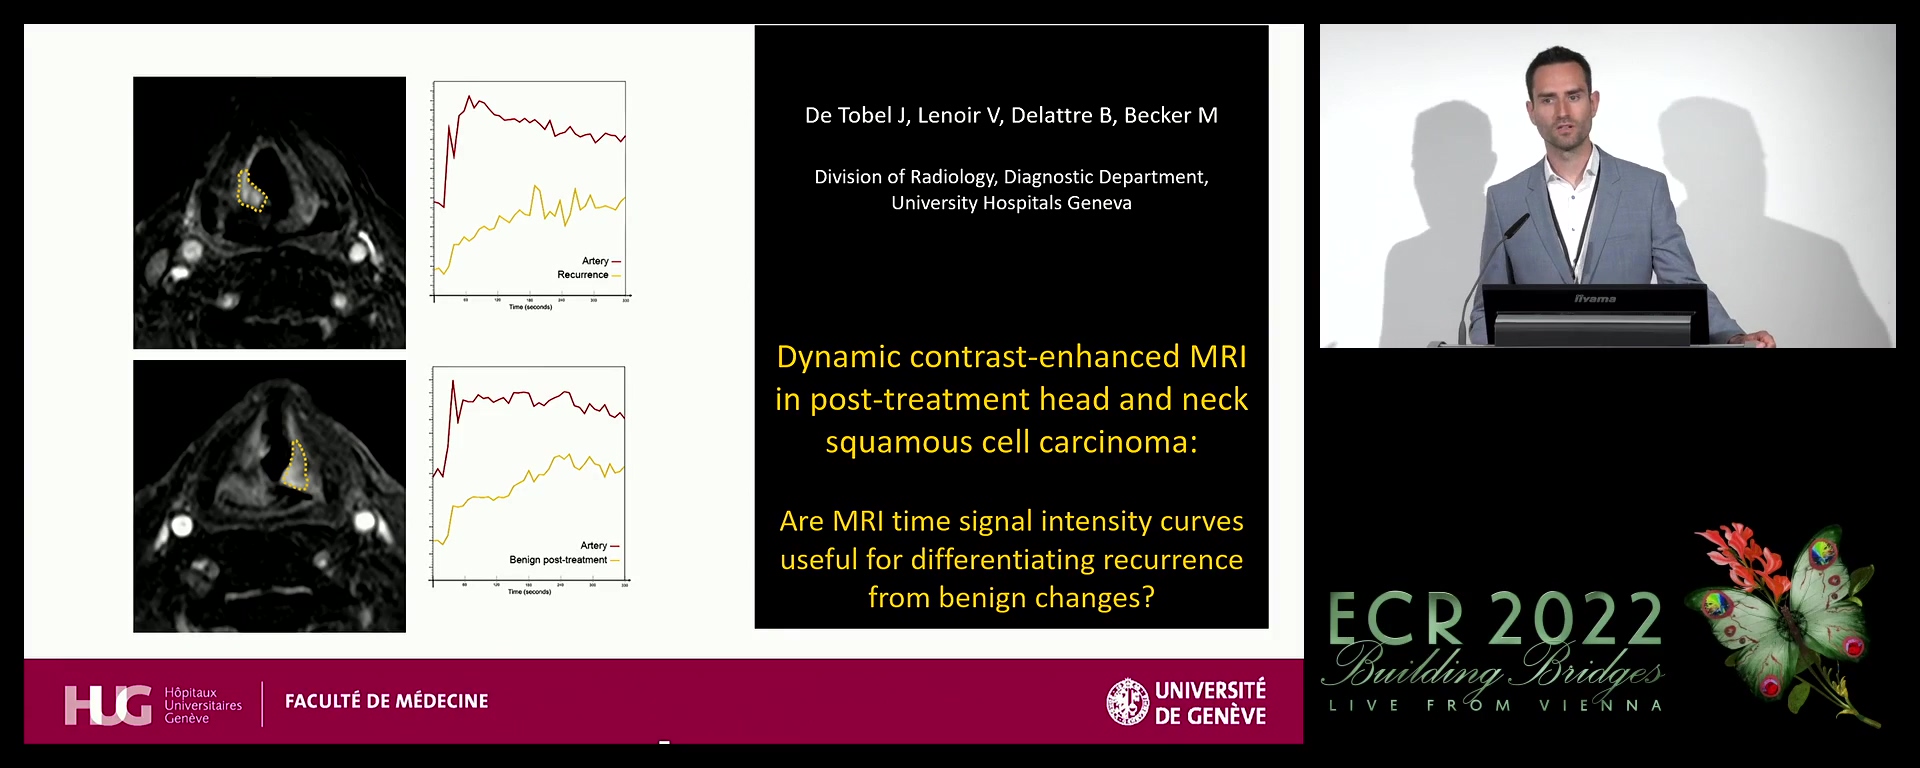 Dynamic contrast-enhanced MRI in post-treatment head and neck squamous cell carcinoma: are MRI time signal intensity curves useful for differentiating recurrence from benign changes?